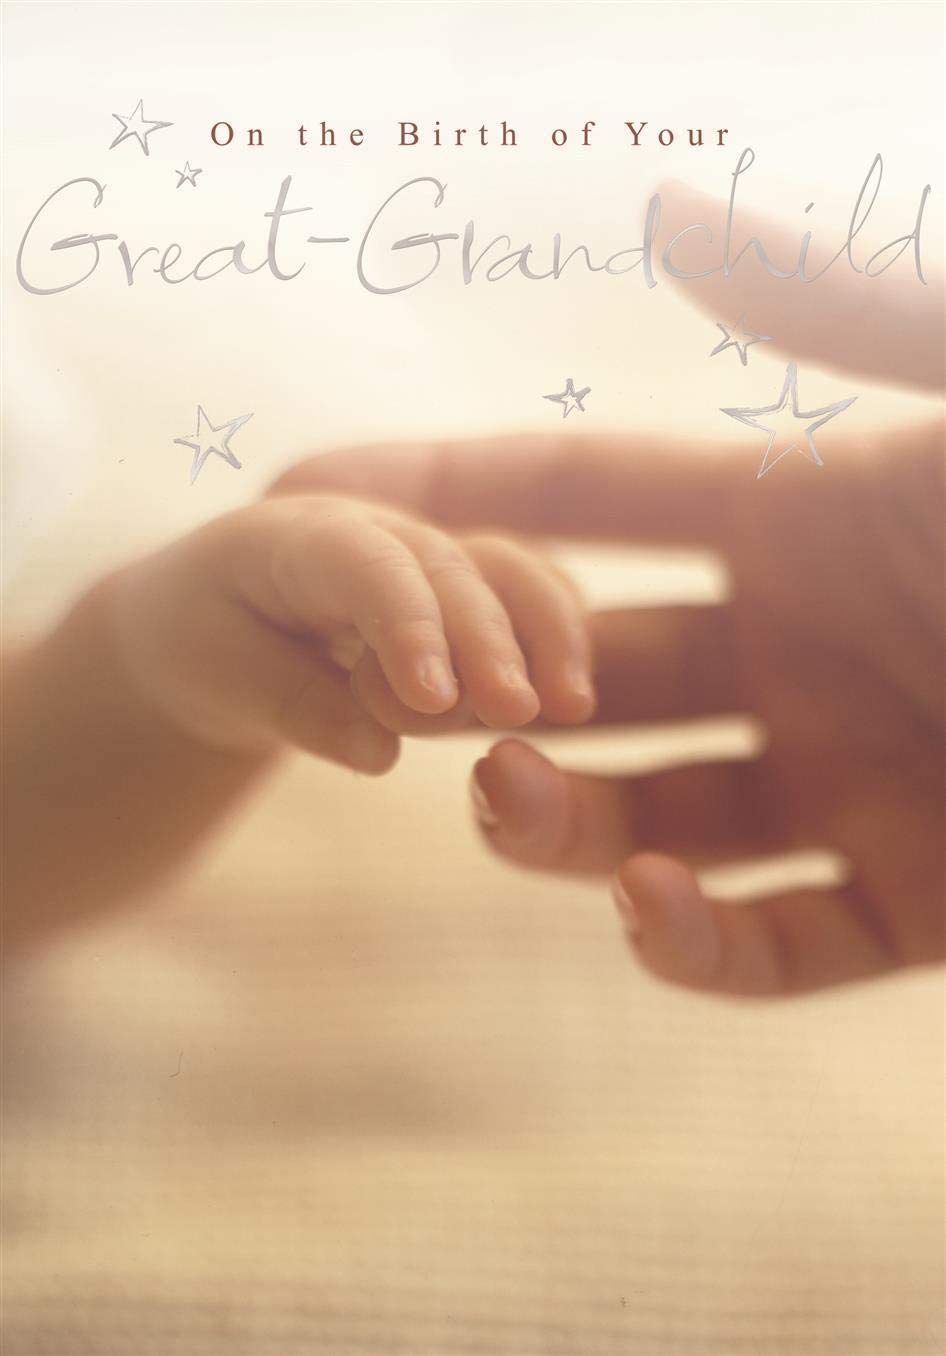 Birth of Your Great-Grandchild Card - The Magic Touch